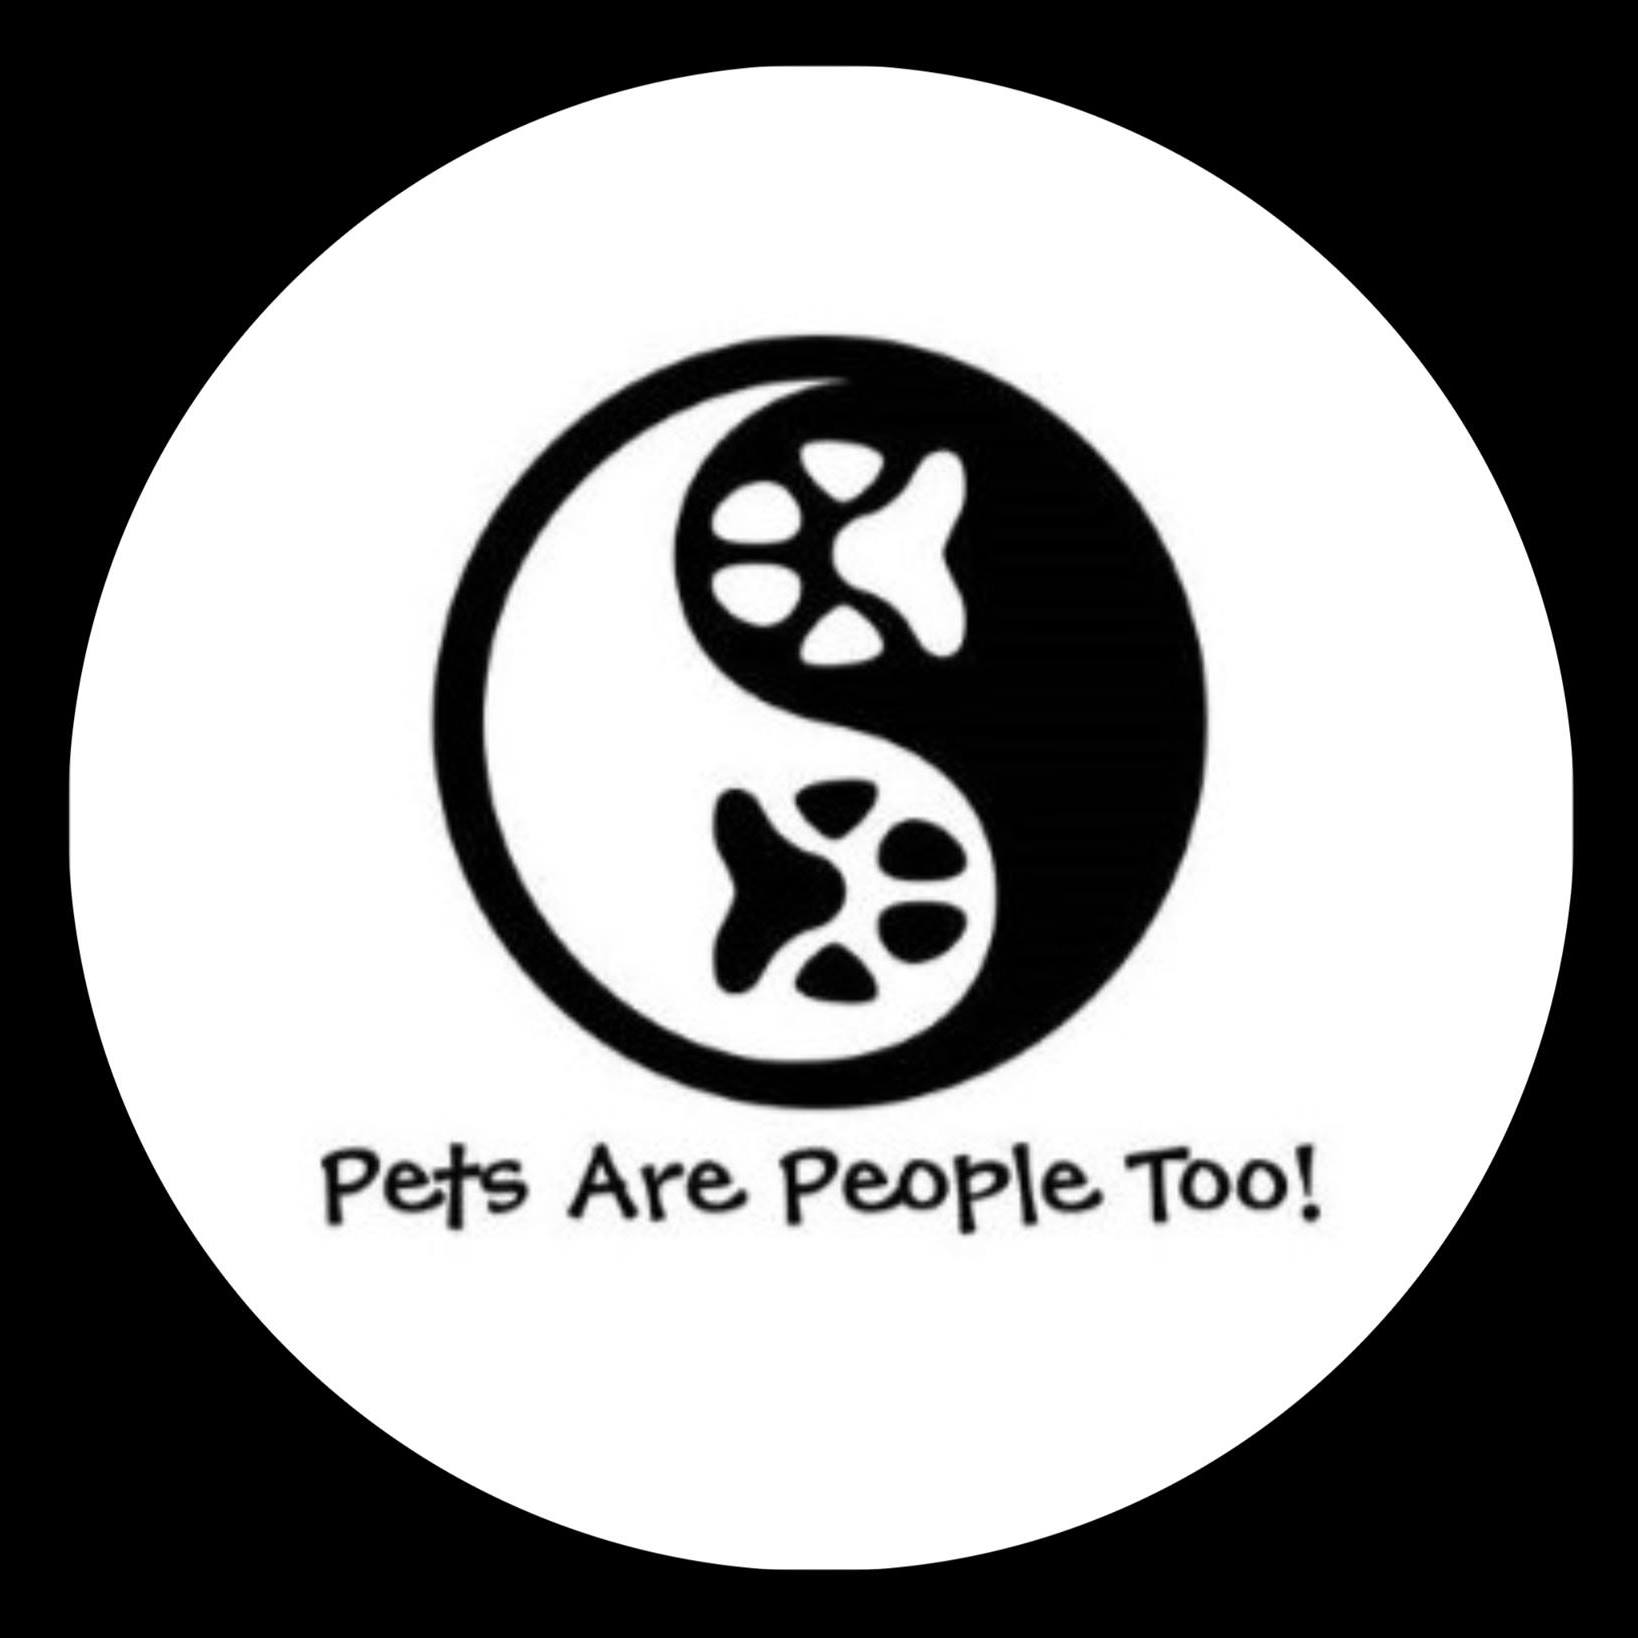 Business logo of Pets Are People Too